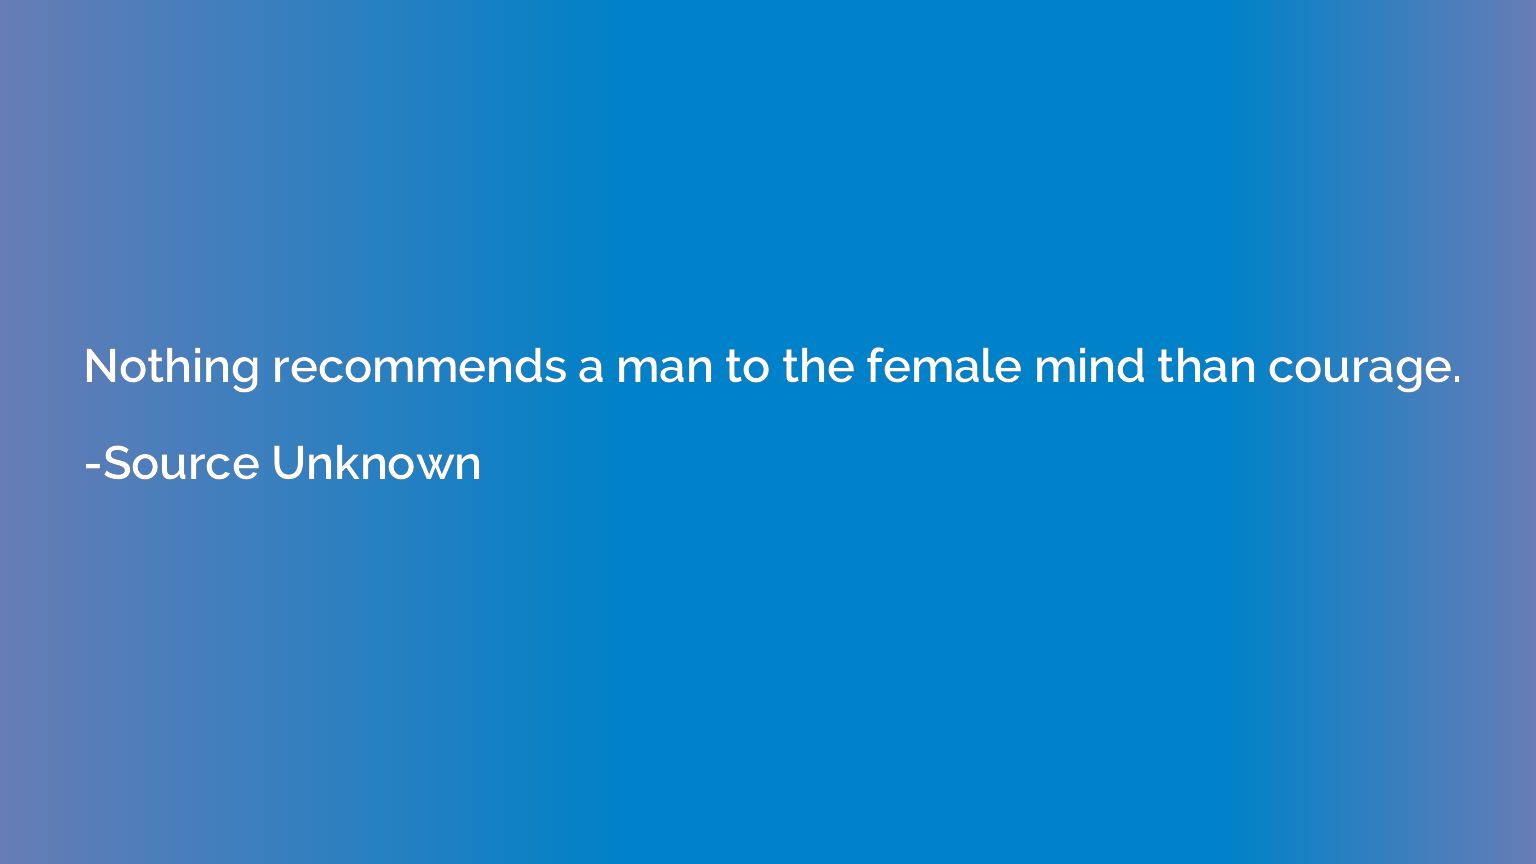 Nothing recommends a man to the female mind than courage.